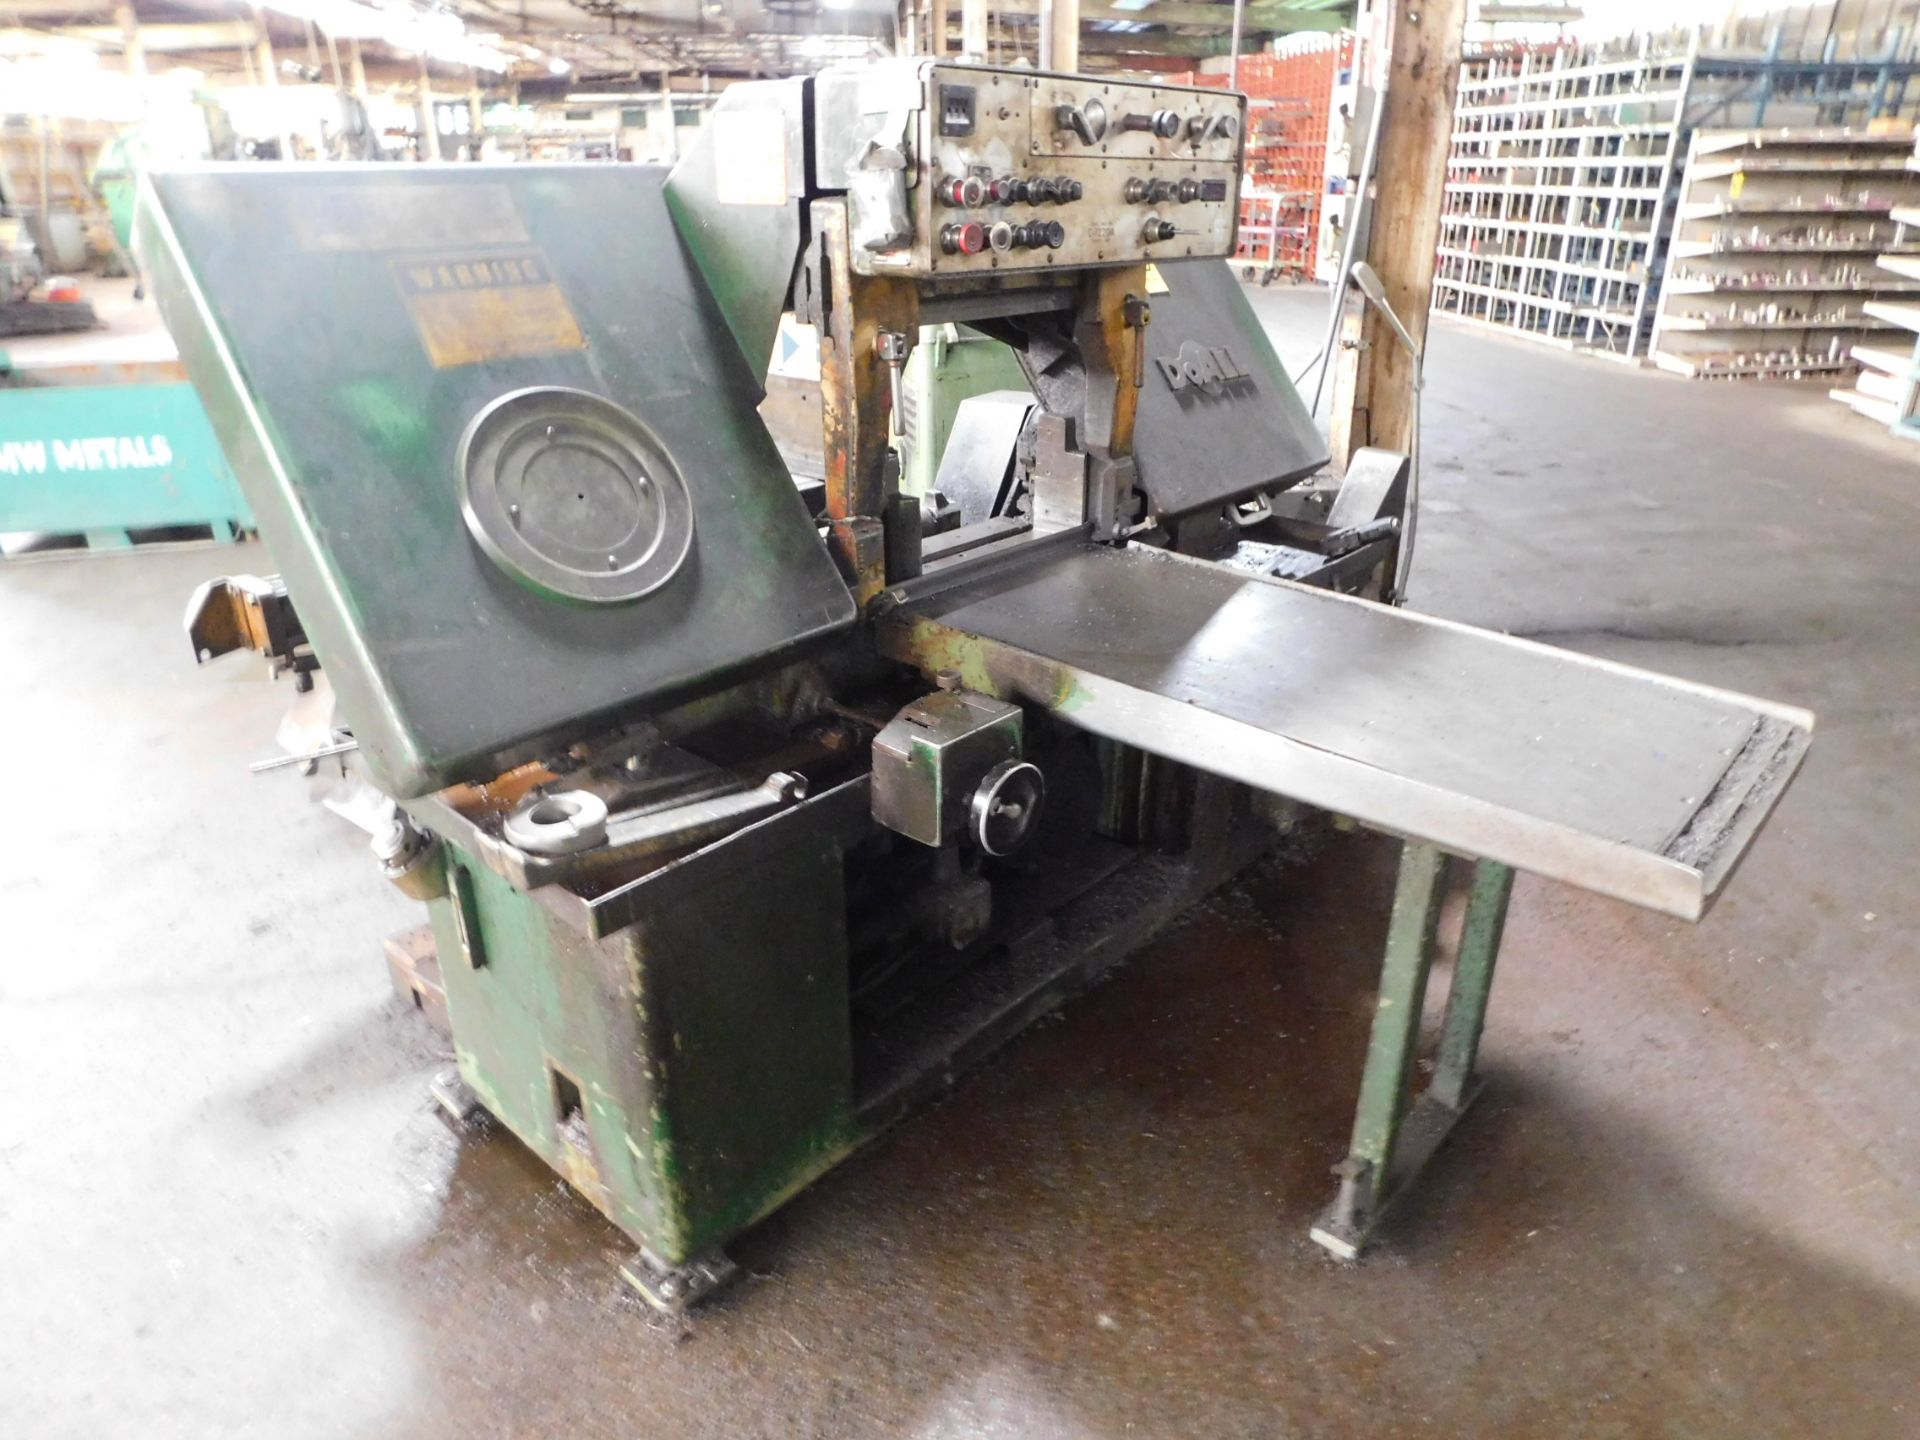 Do-All Model C-1220A Fully Automatic Horizontal Band Saw, s/n 40281143, 12" X 20" Capacity, Not In - Image 5 of 8